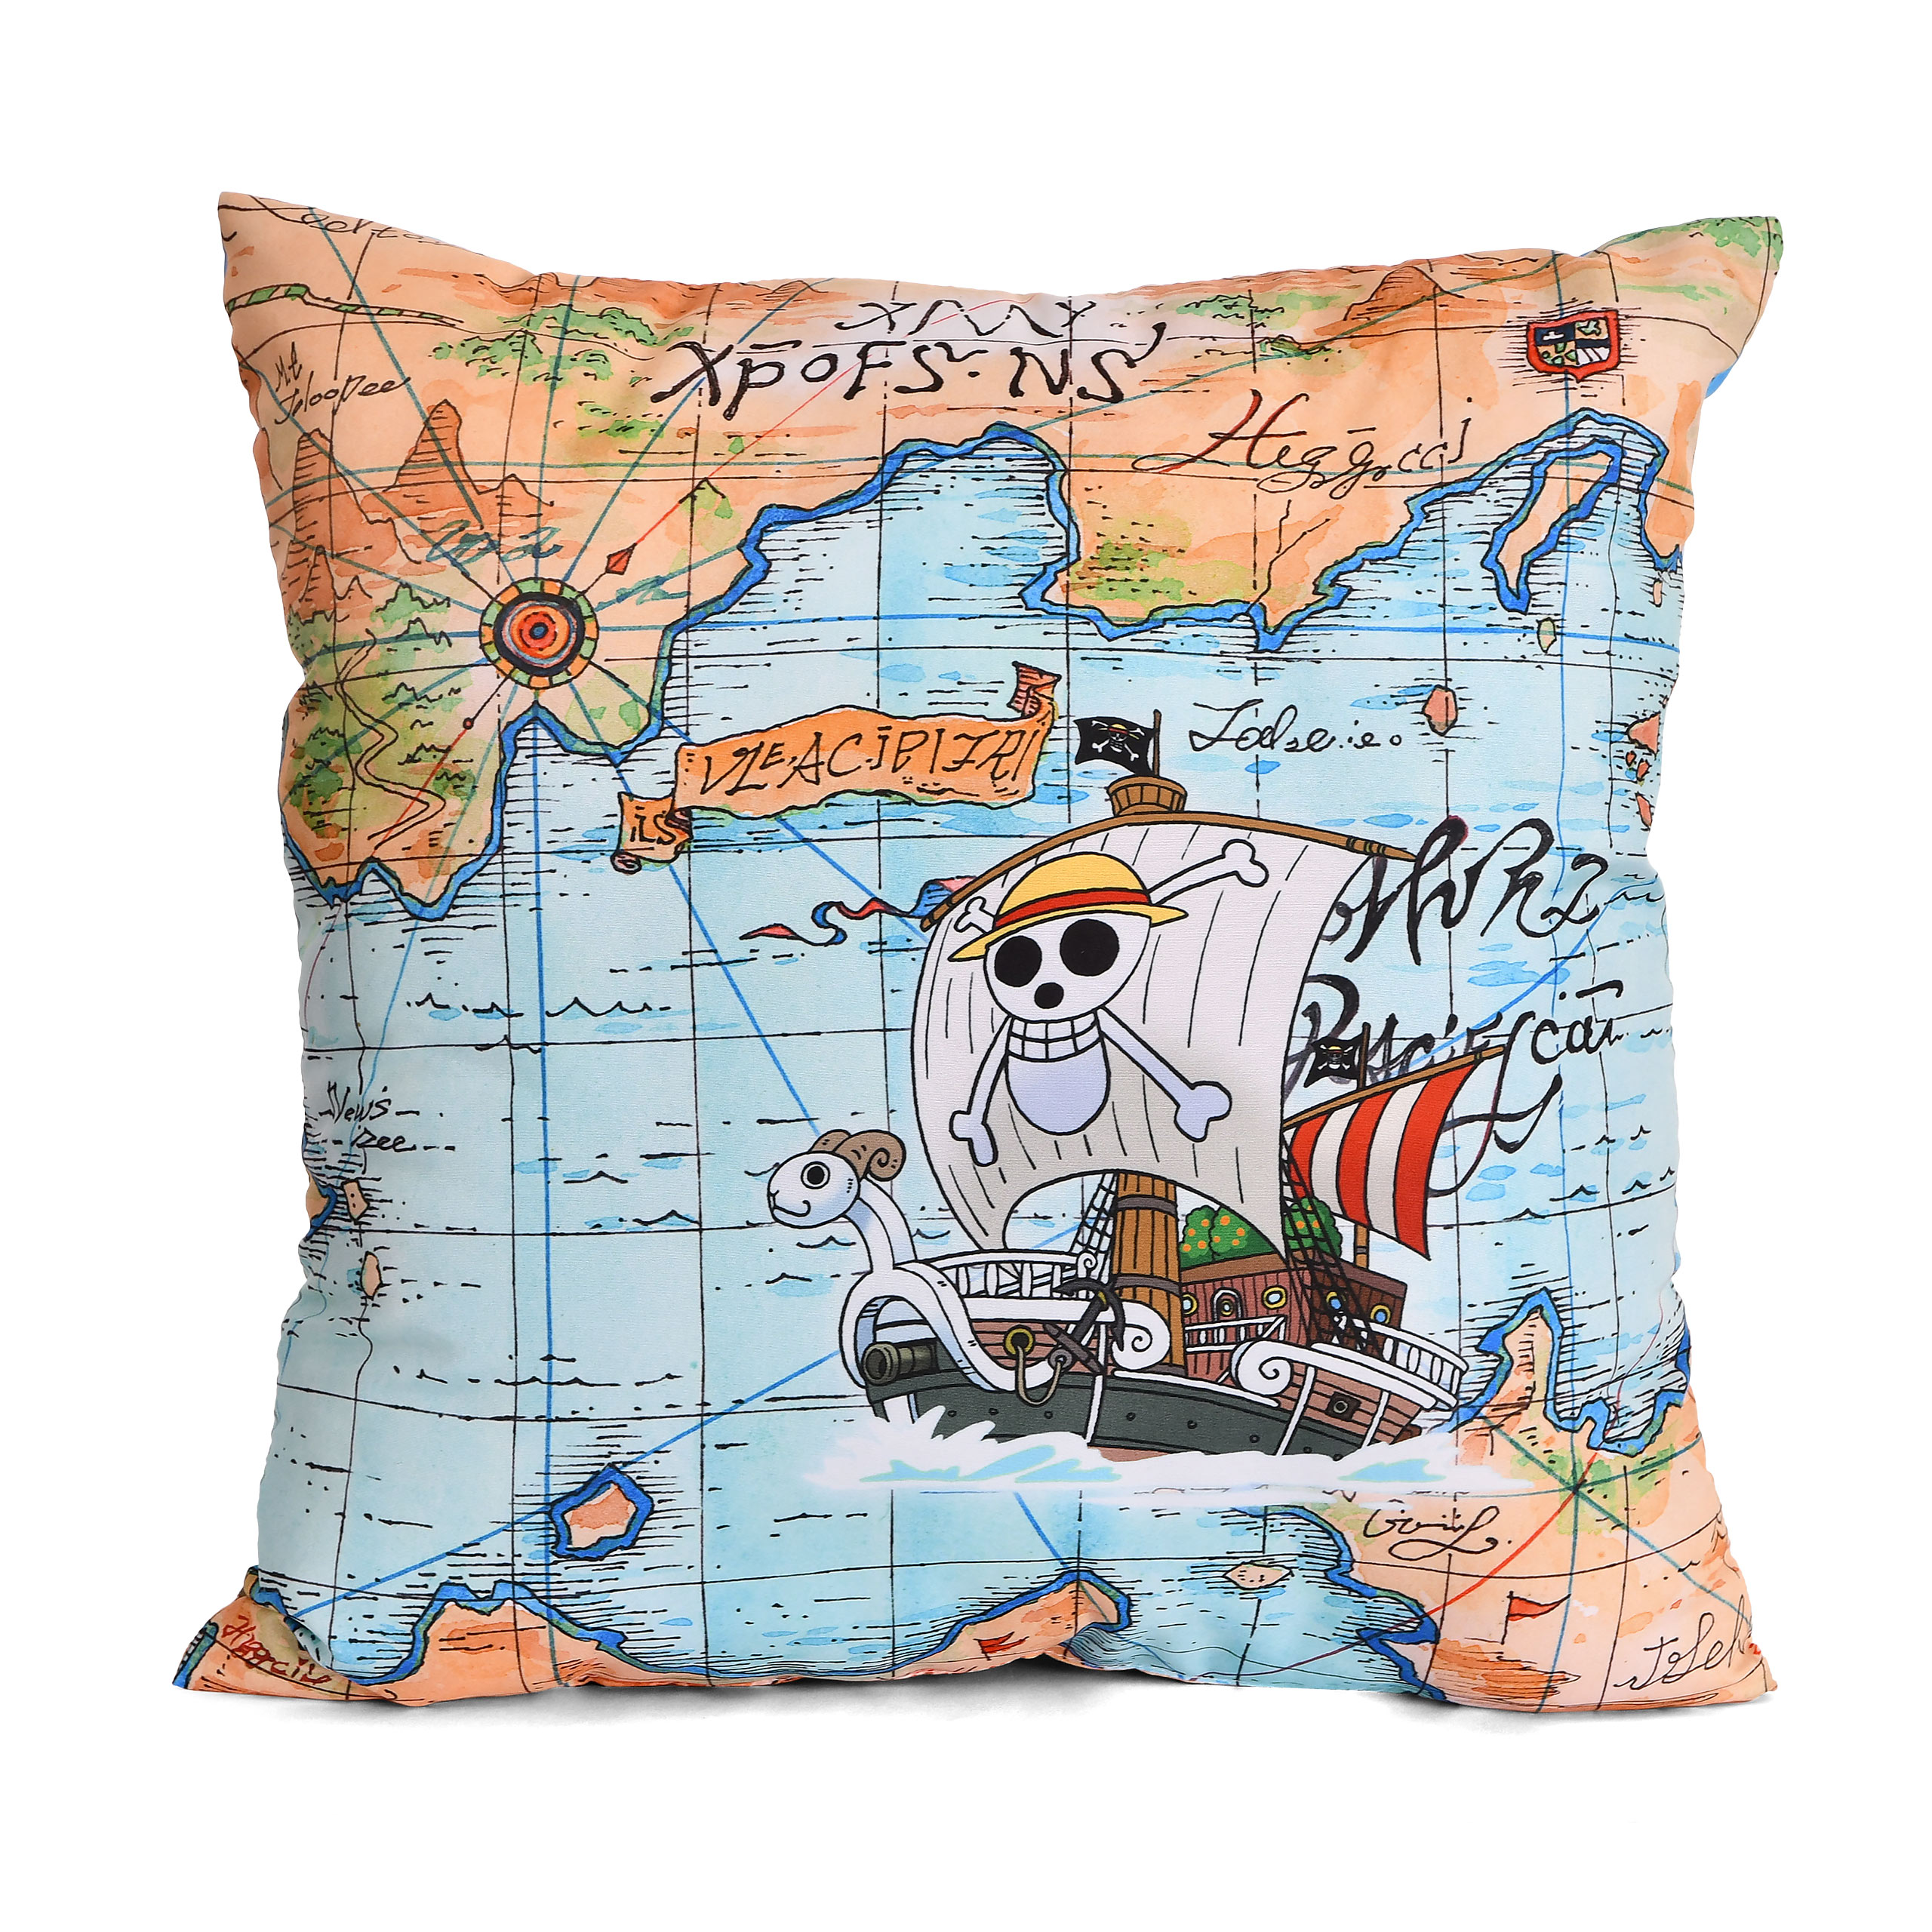 One Piece - Characters Pillow